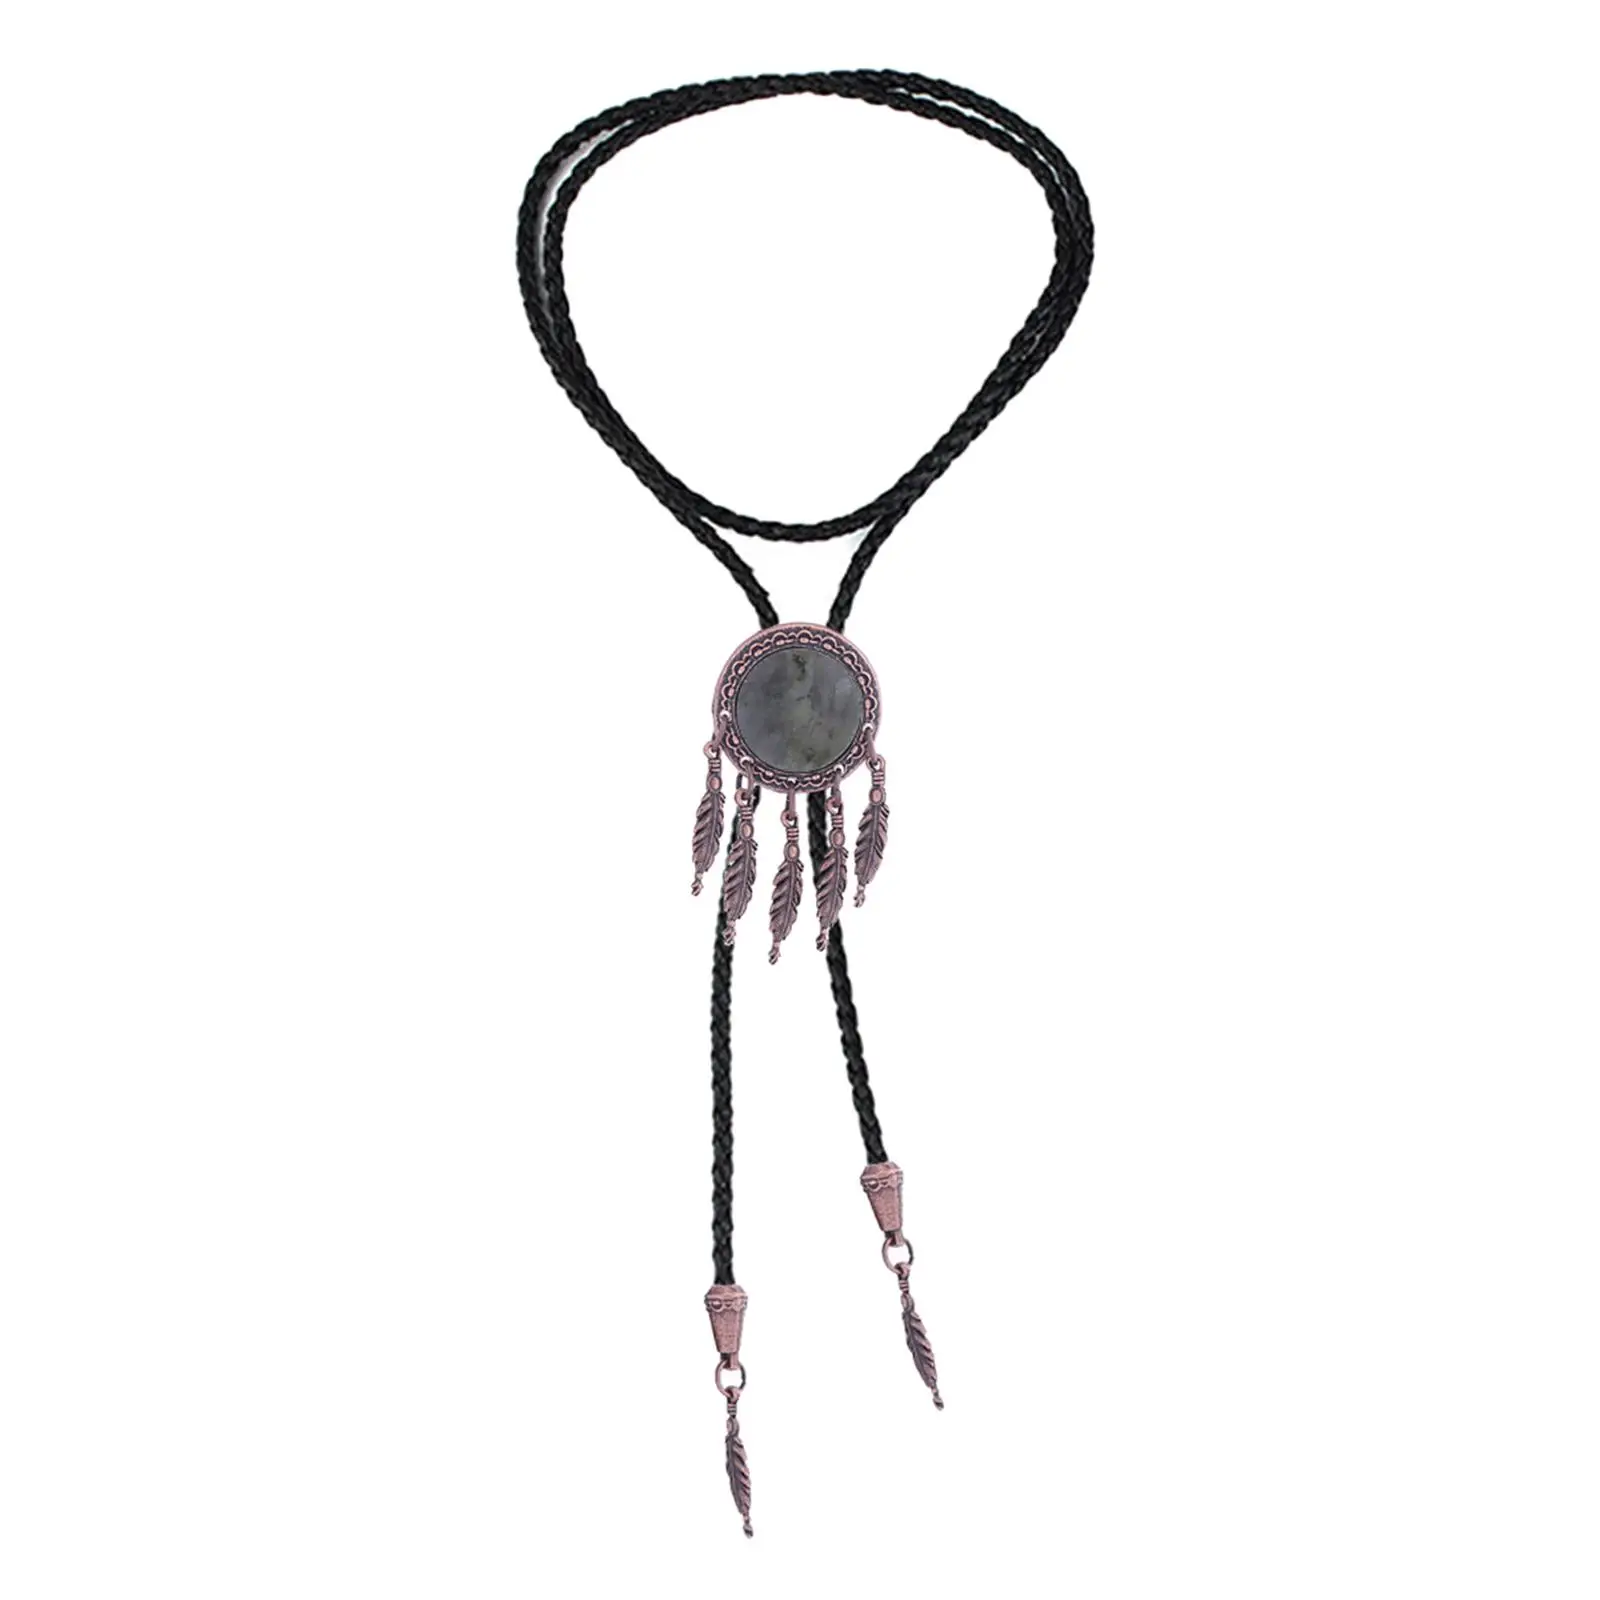 Retro Style Bolo Tie PU Leather Rope Tassels Pendant for Cosplay Birthday